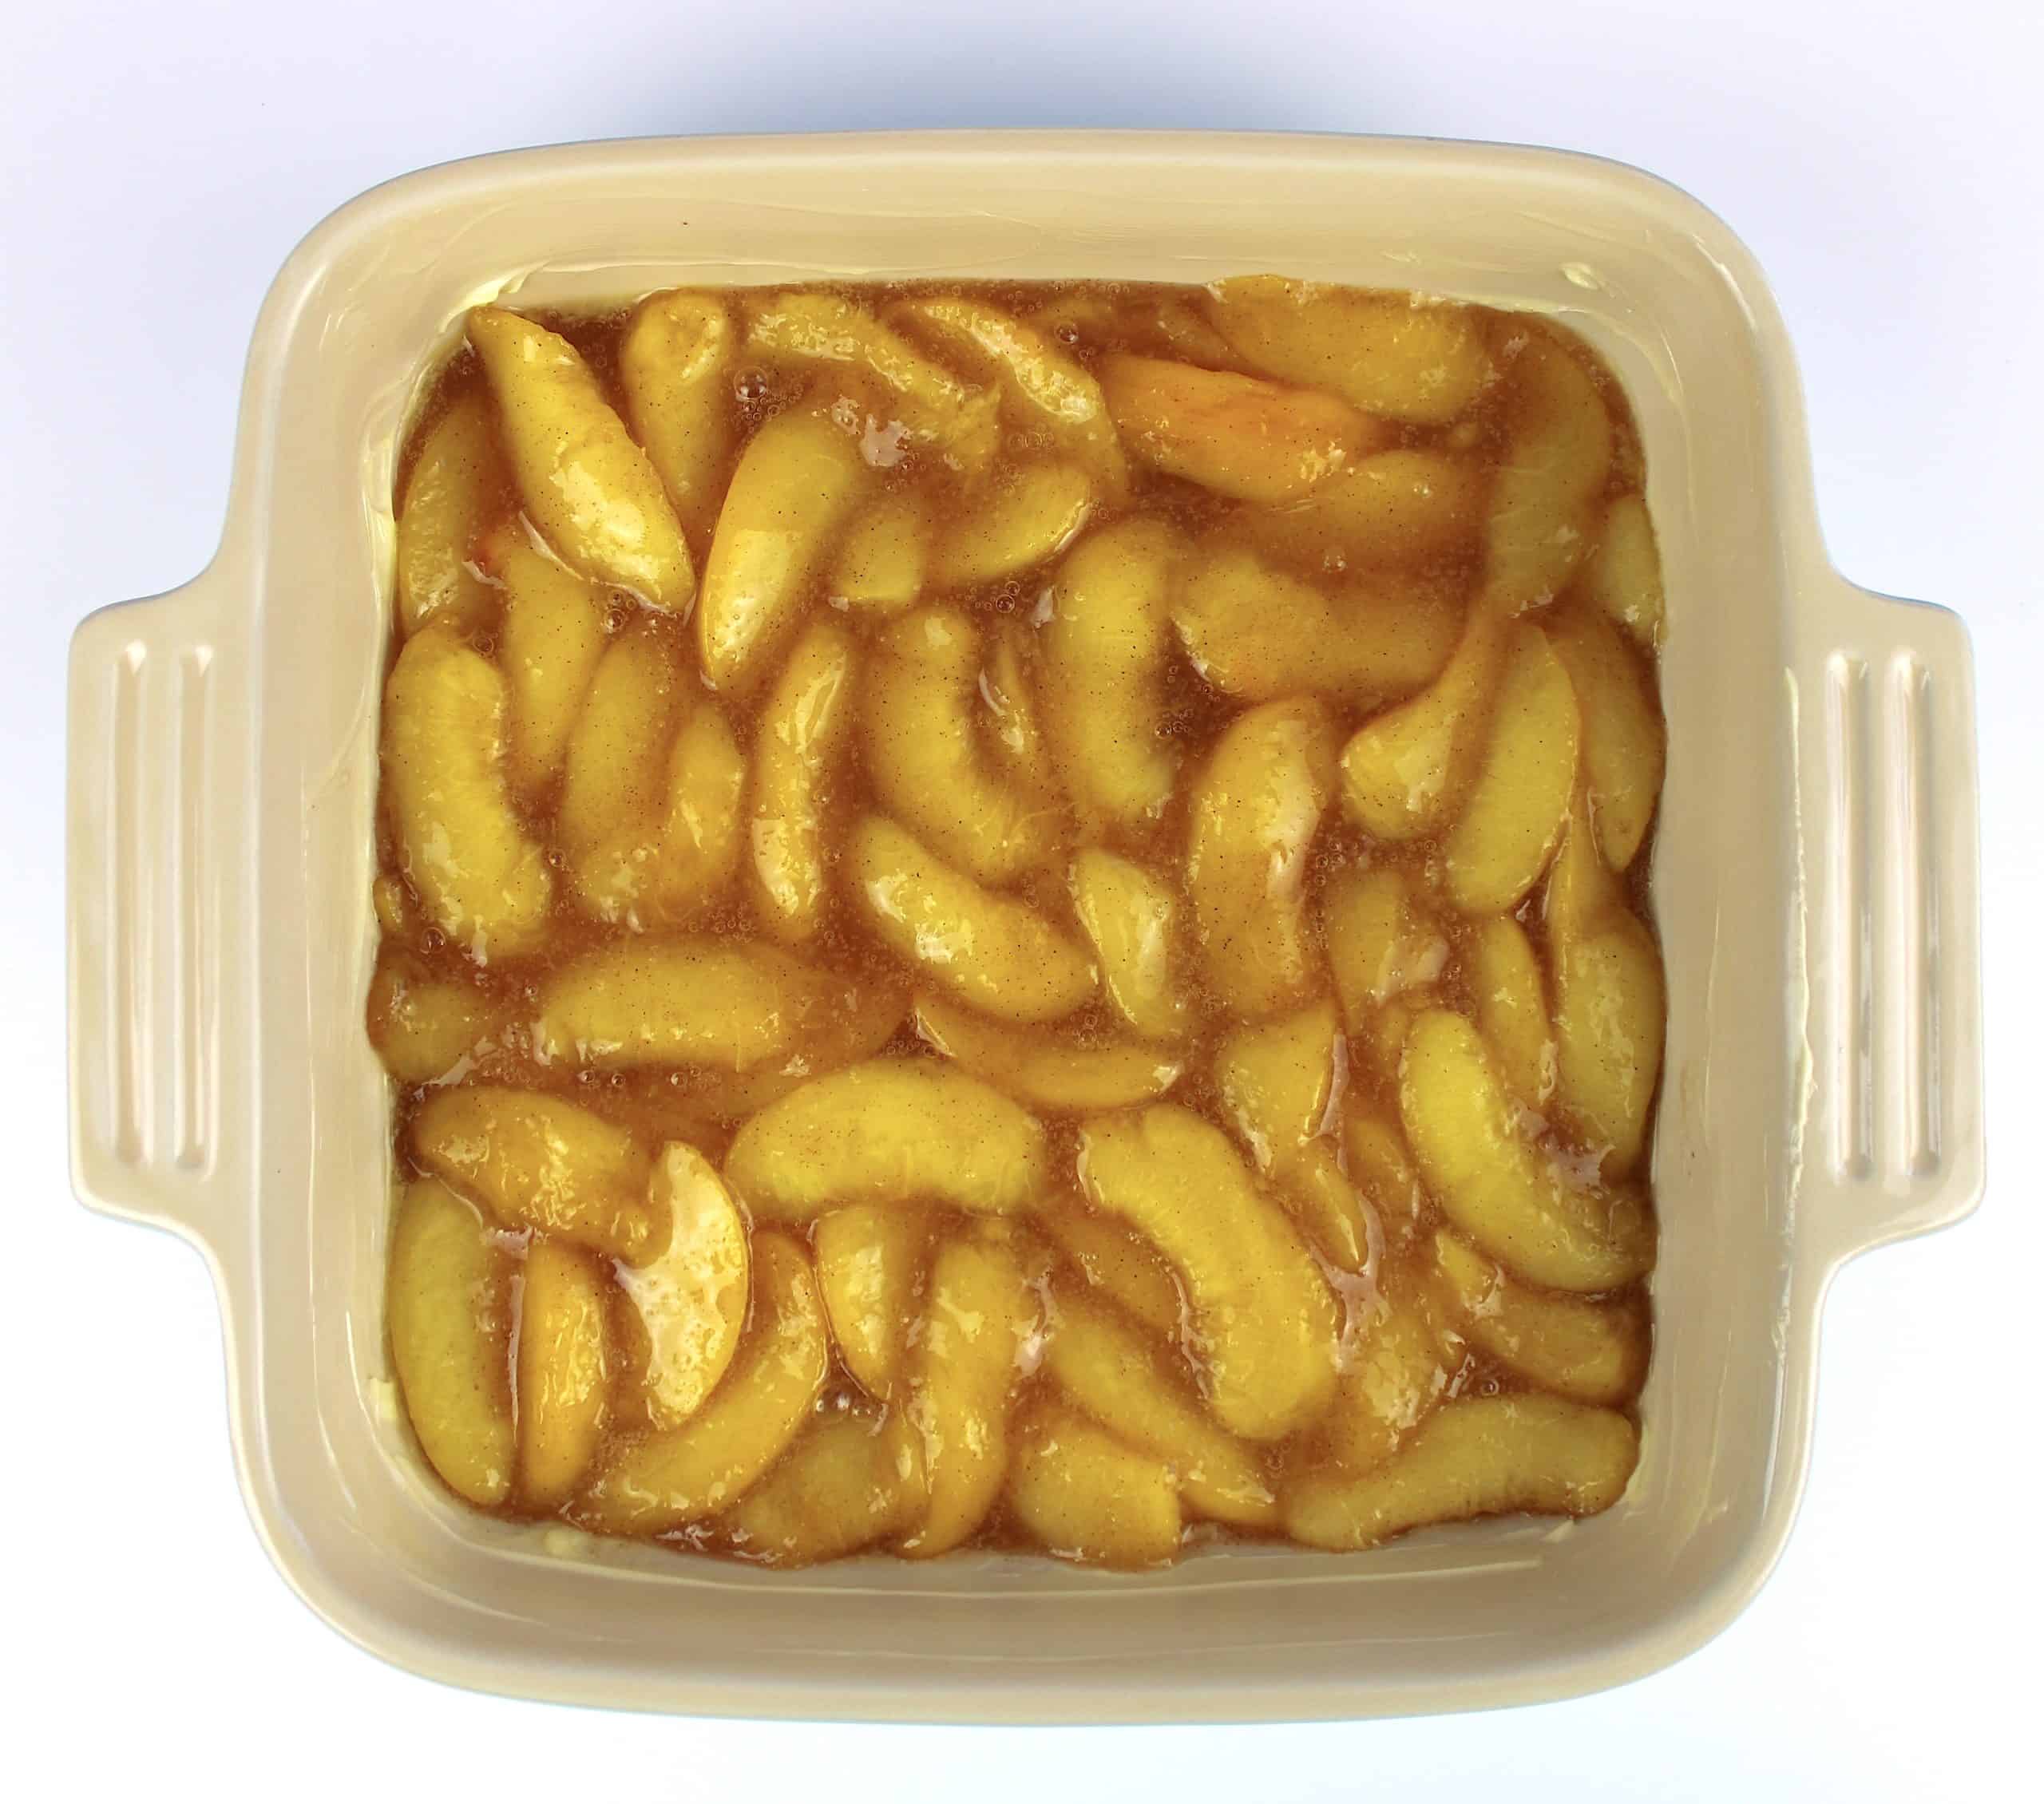 cooked peach slices in baking dish